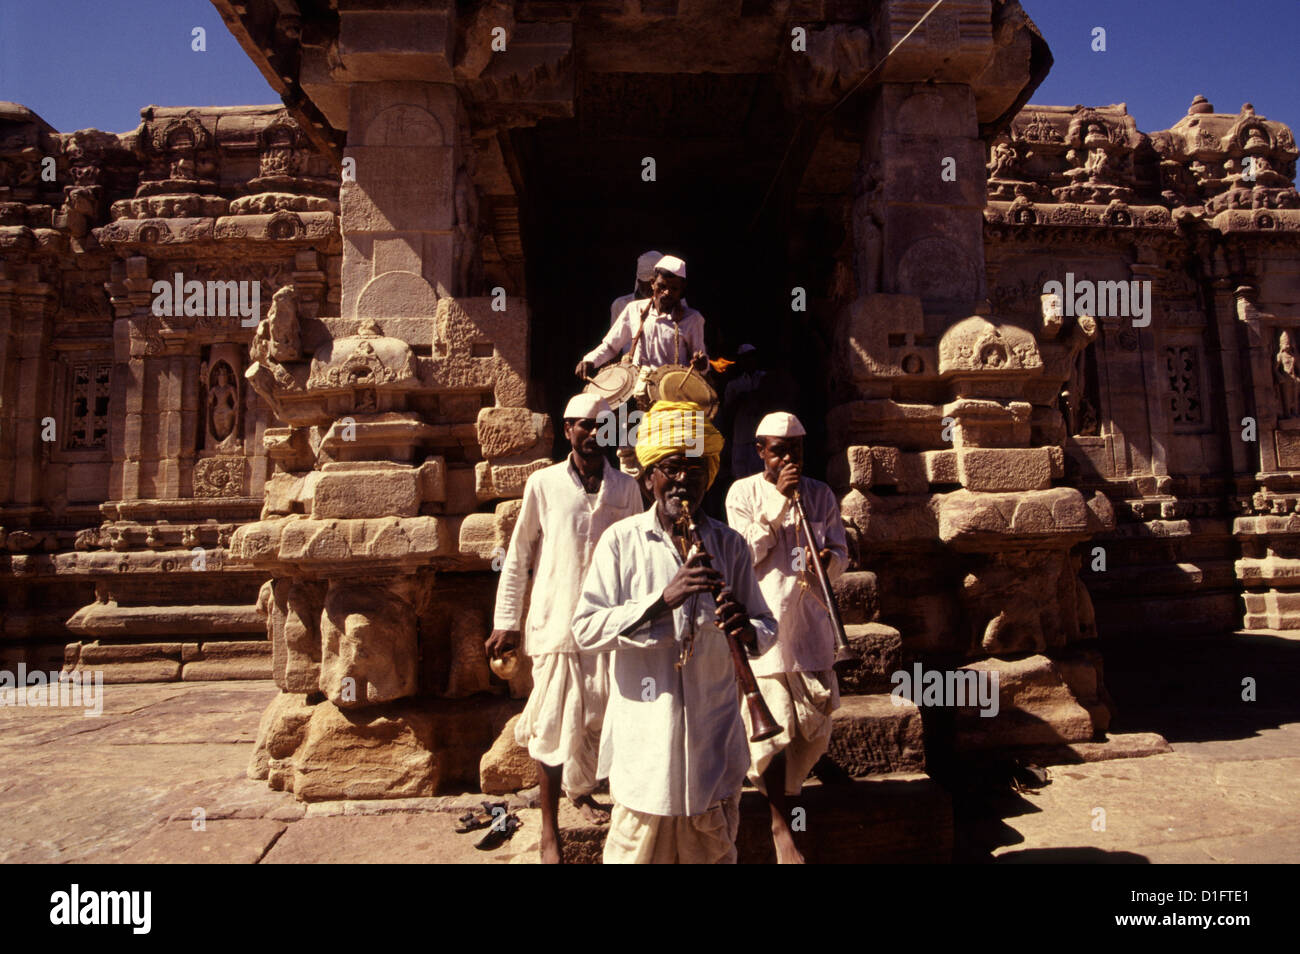 Men playing the Shehnai musical instrument during a religious procession amid the ruins of 8th century Chalukya monuments in Pattadakal, also spelled Paṭṭadakallu in Karnataka state India Stock Photo